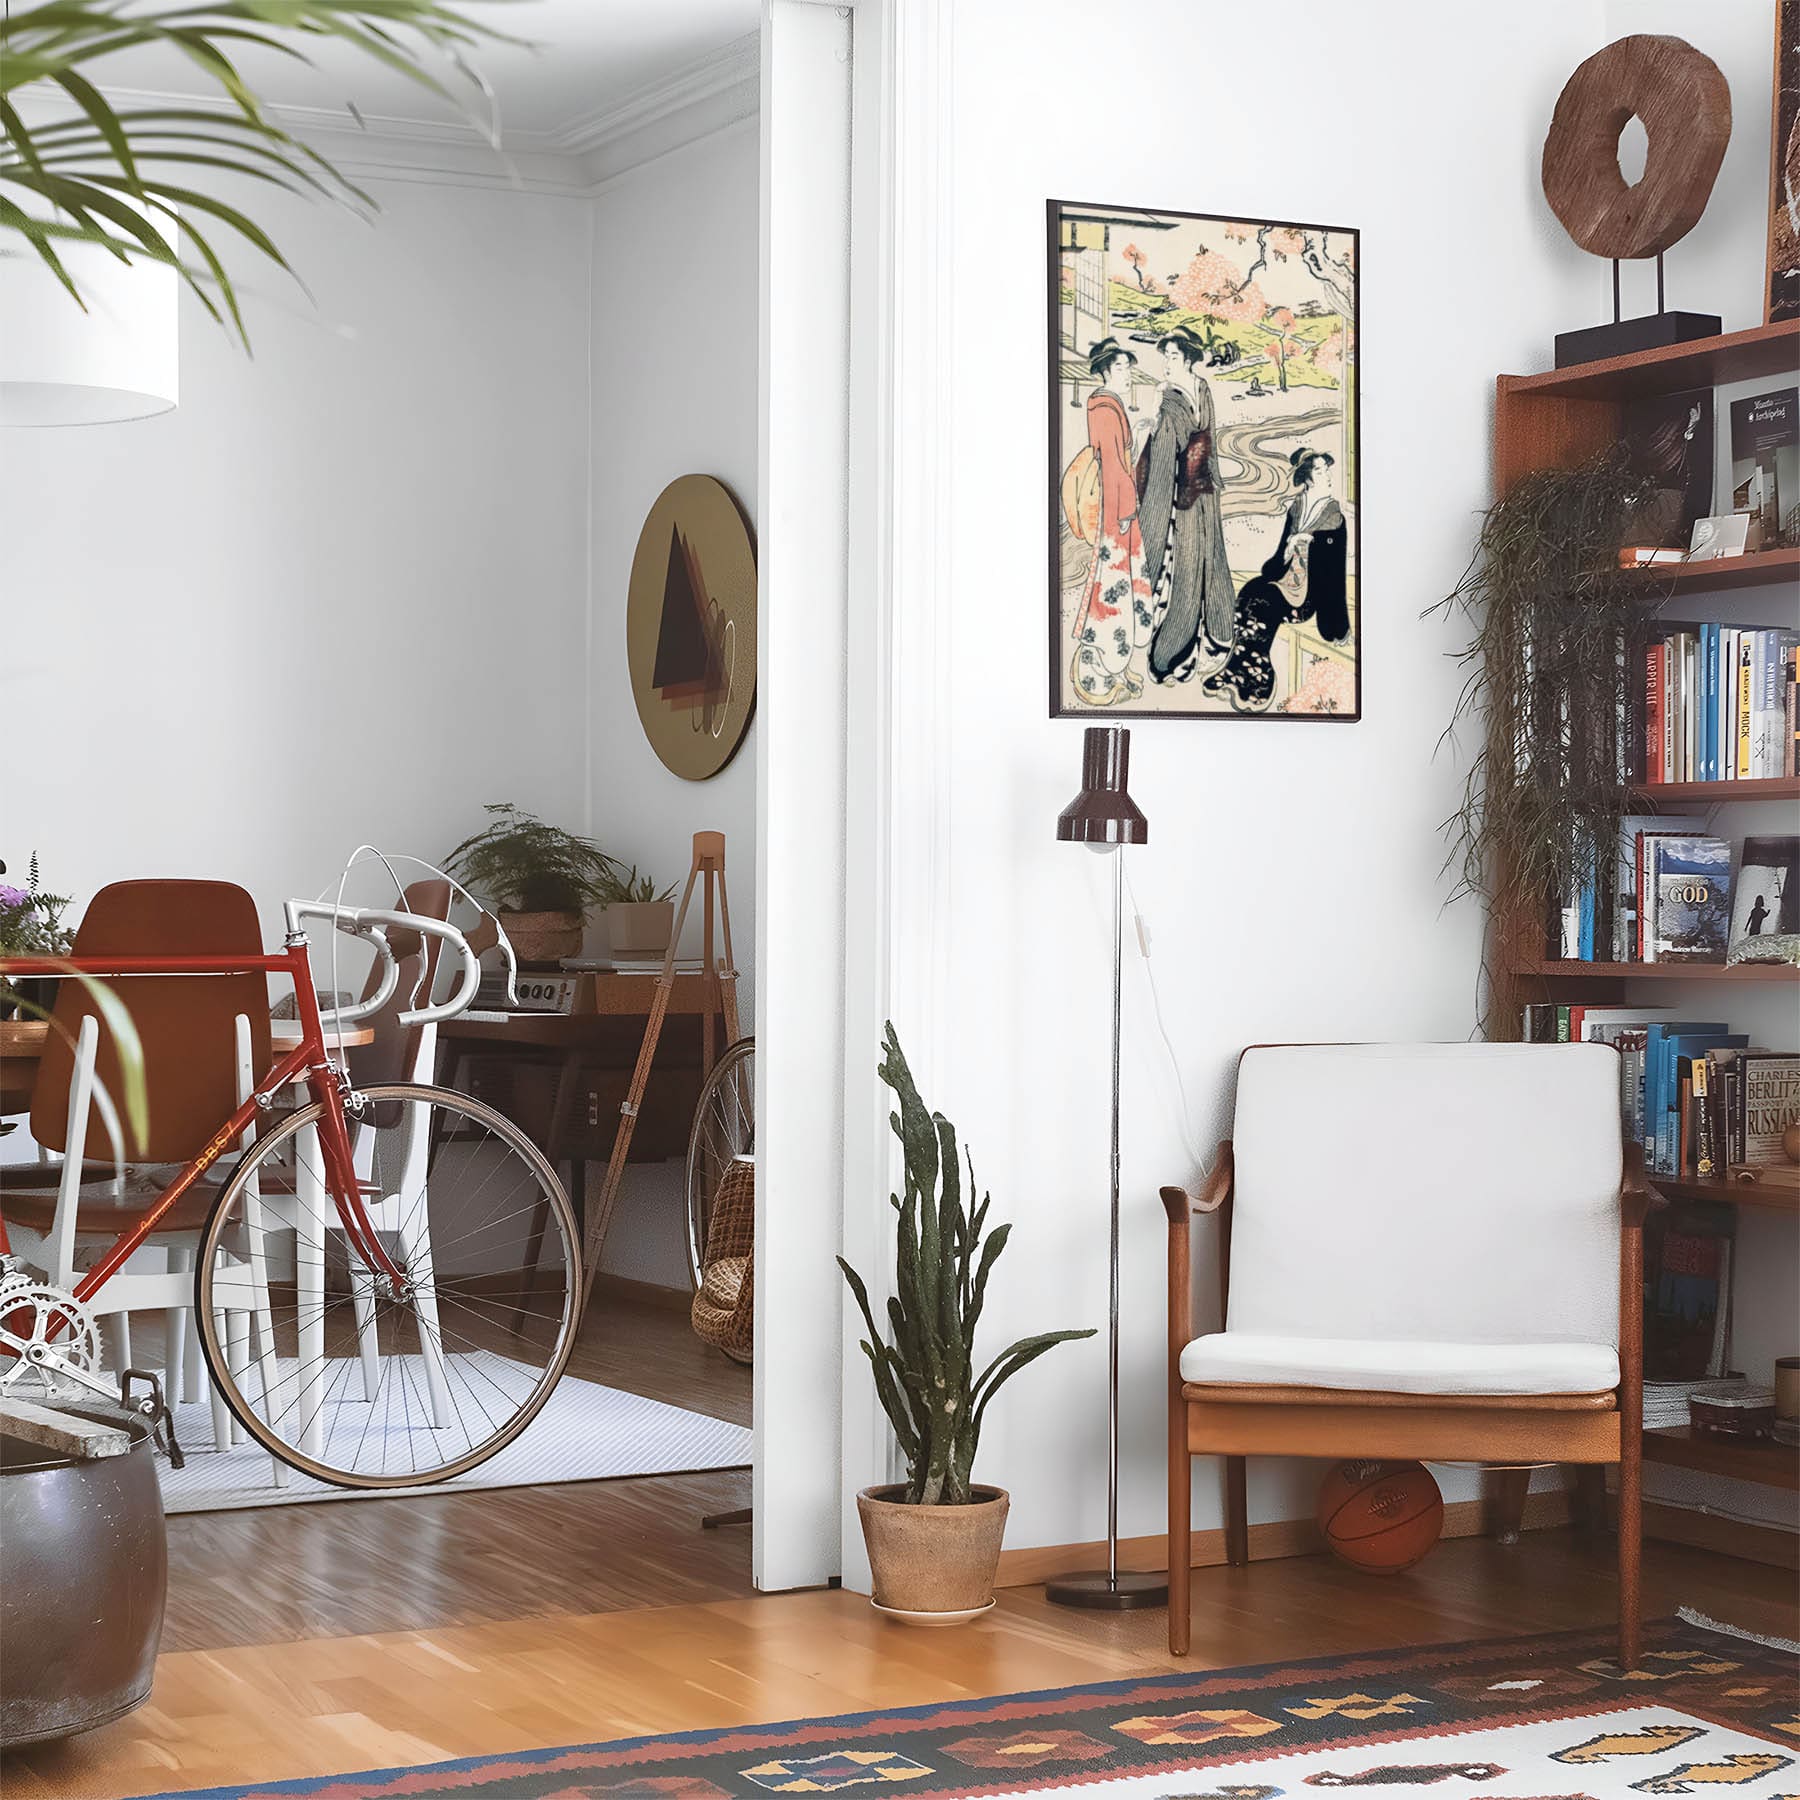 Eclectic living room with a road bike, bookshelf and house plants that features framed artwork of a Women in a Spring Landscape above a chair and lamp